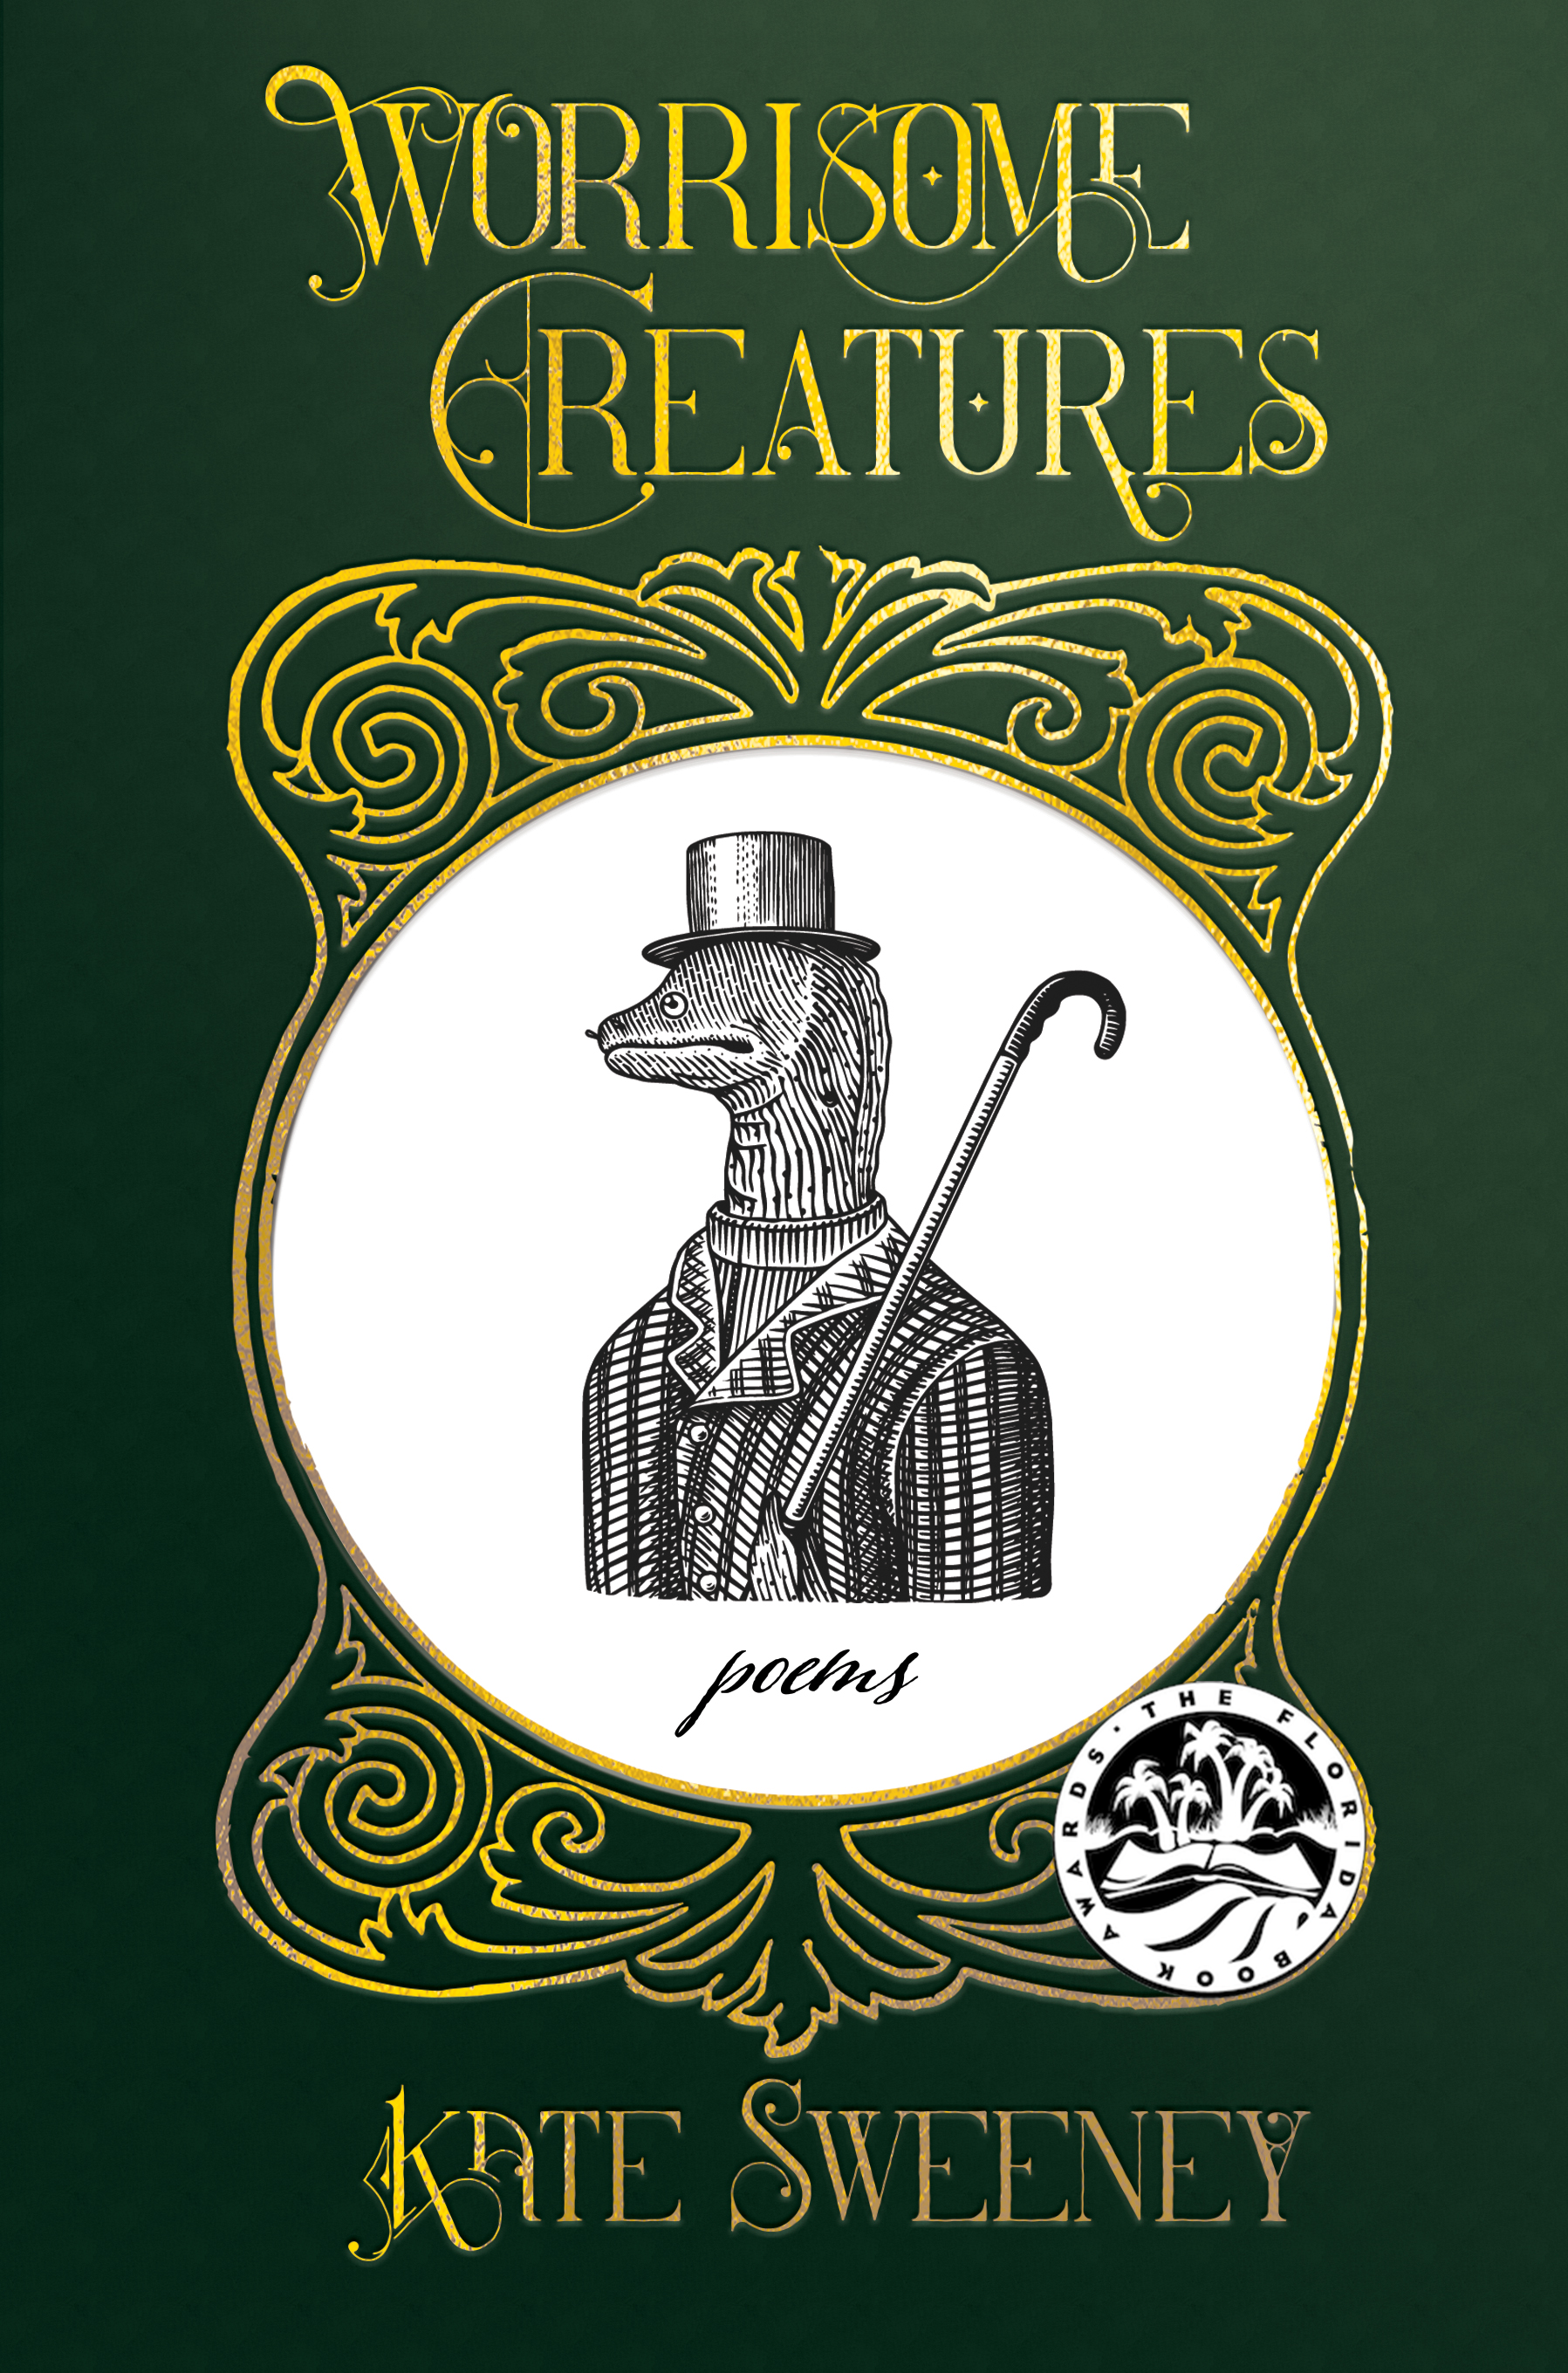 Worrisome Creatures: poems by Kate Sweeney won the poetry category in the 2022 Florida Book Awards. This version of the green cover with Victorian style gold ornamentation and lettering and a strange snake wearing a top hat and suit with a cane propped over his &quot;shoulder&quot;